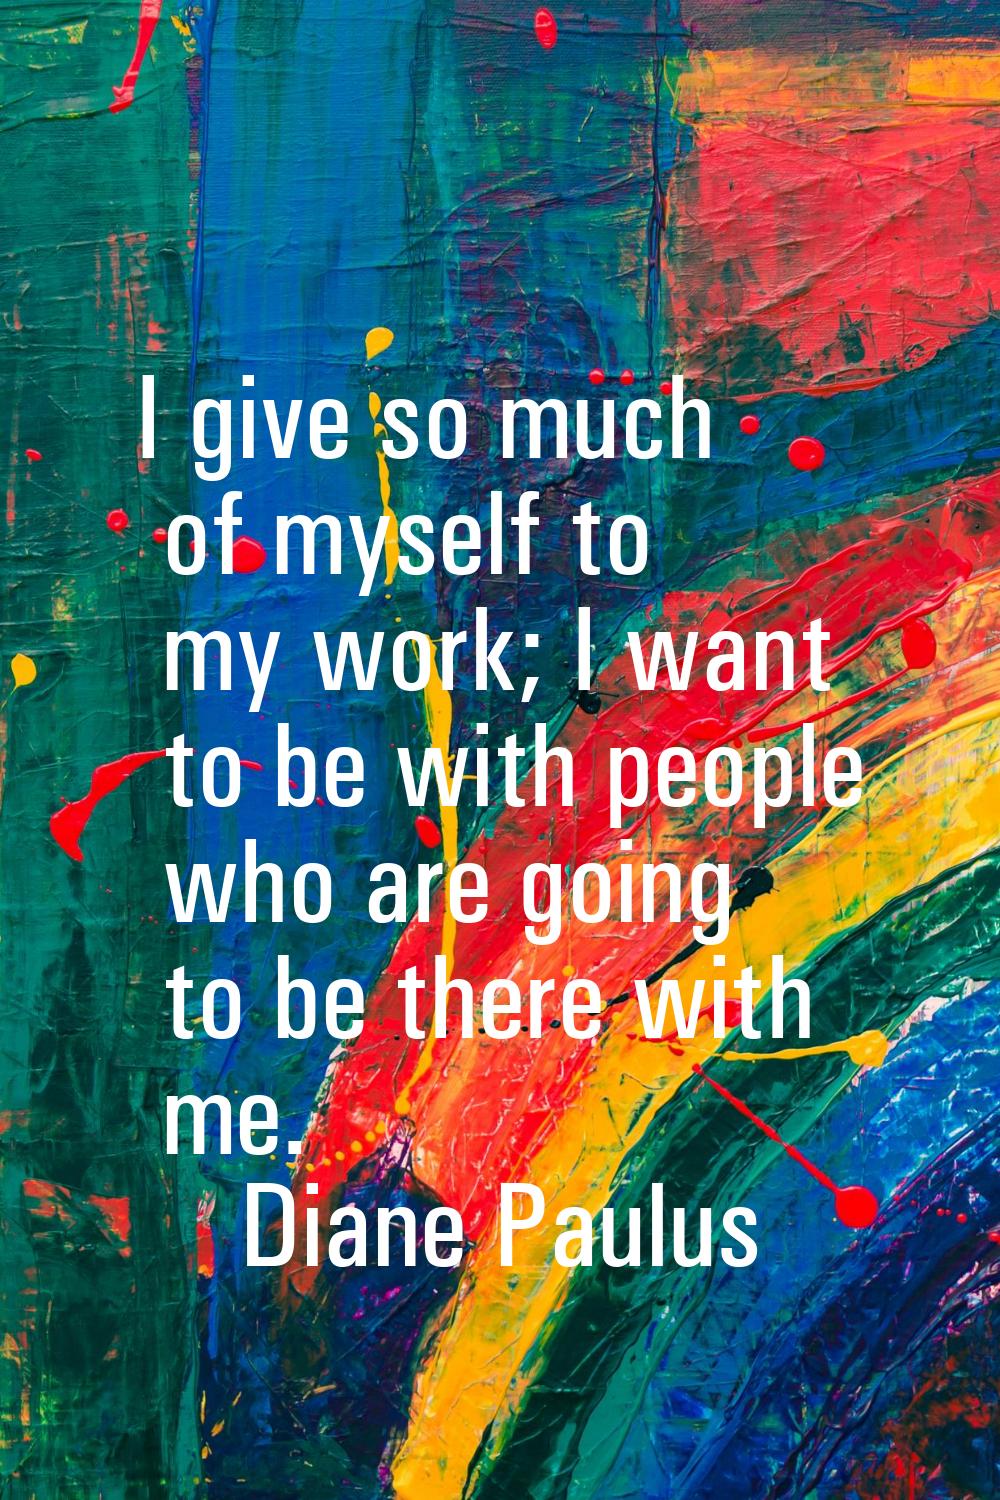 I give so much of myself to my work; I want to be with people who are going to be there with me.